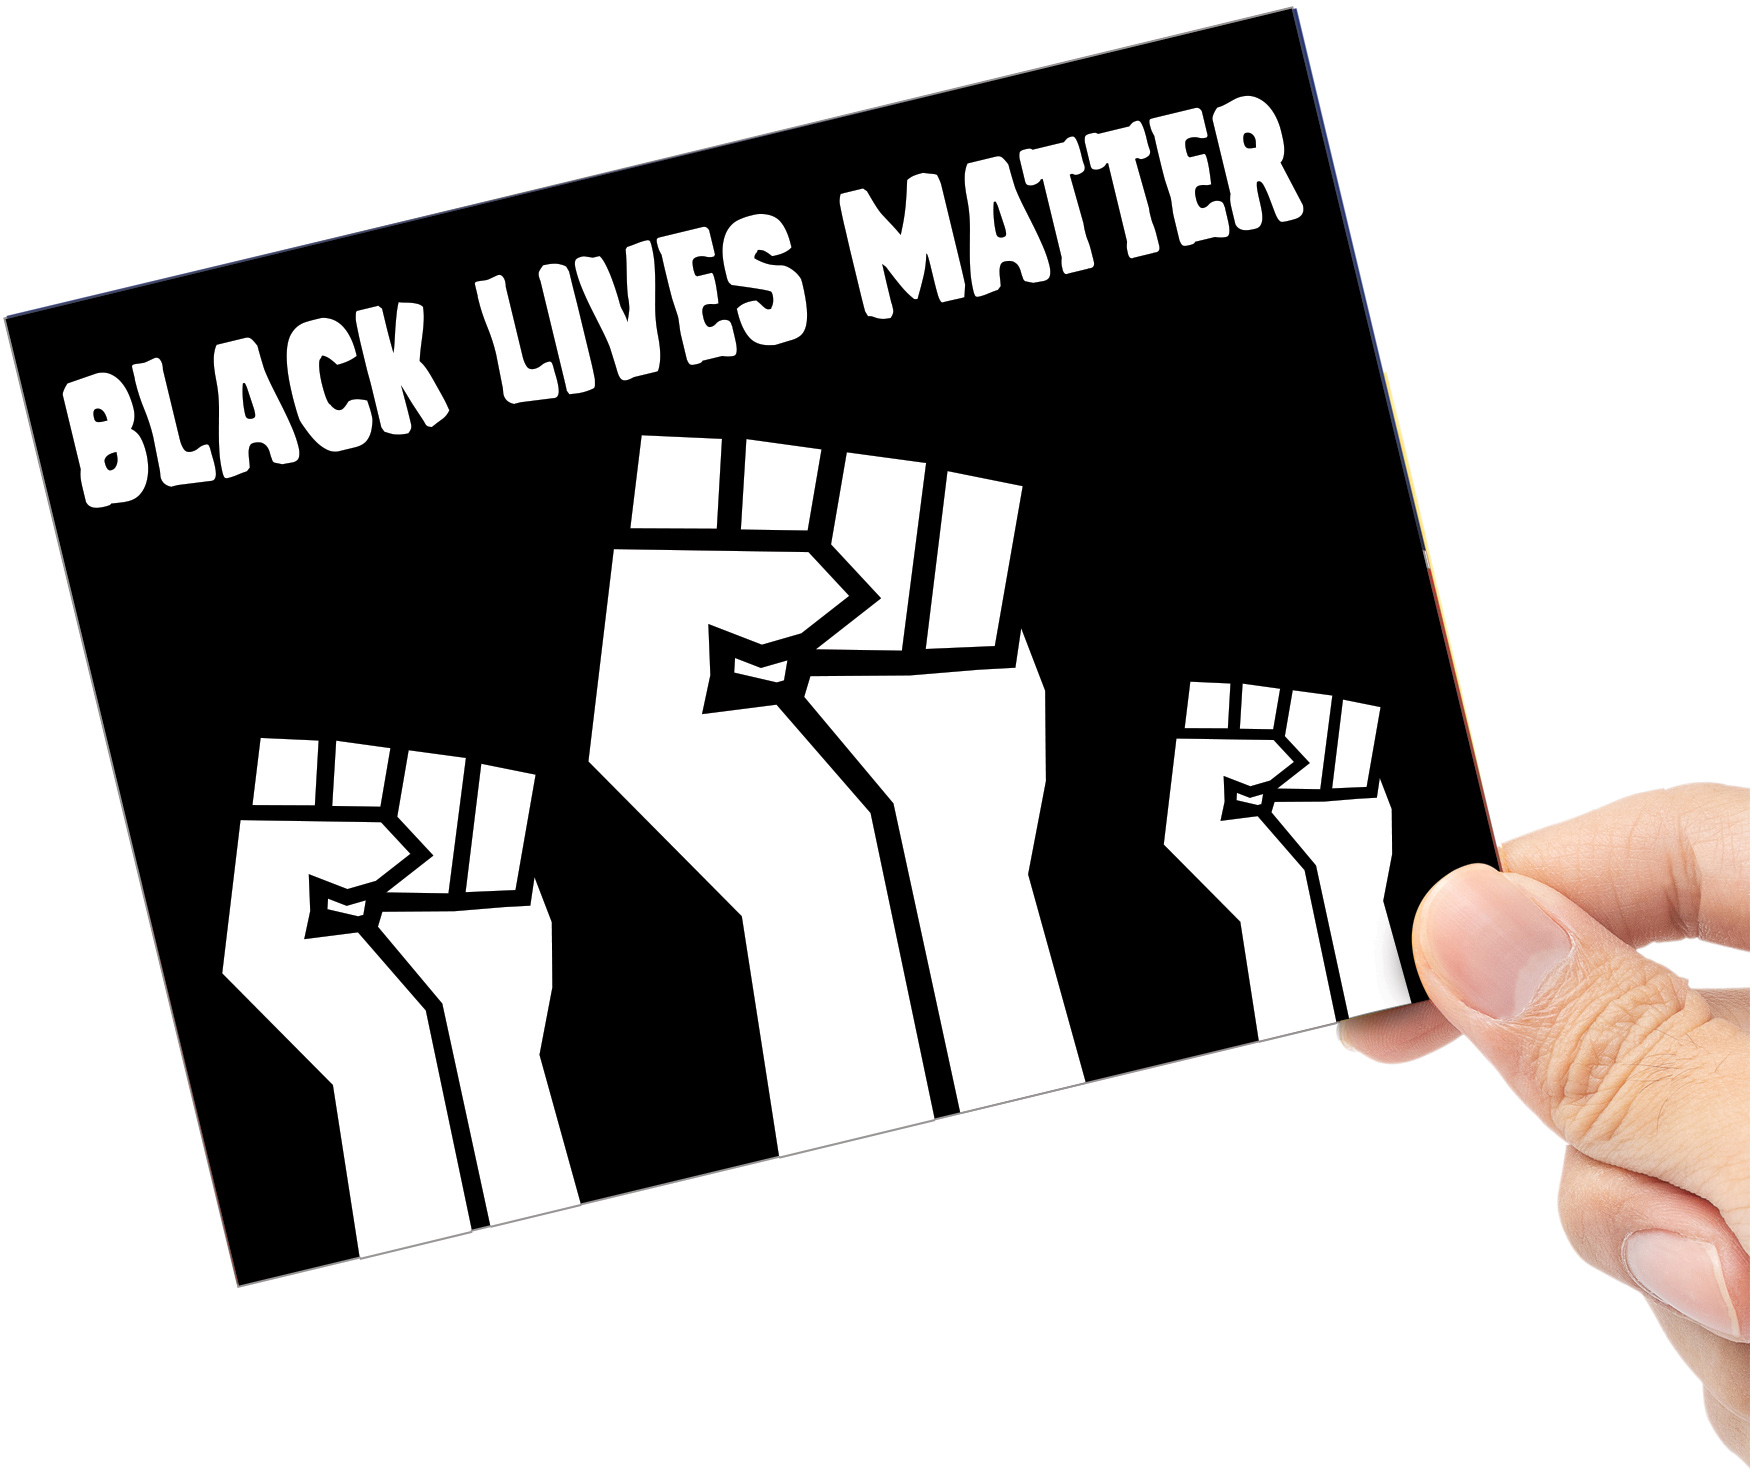 Black Lives Matter Fists in the Air Vinyl Sticker - 6 x 4.5 inch